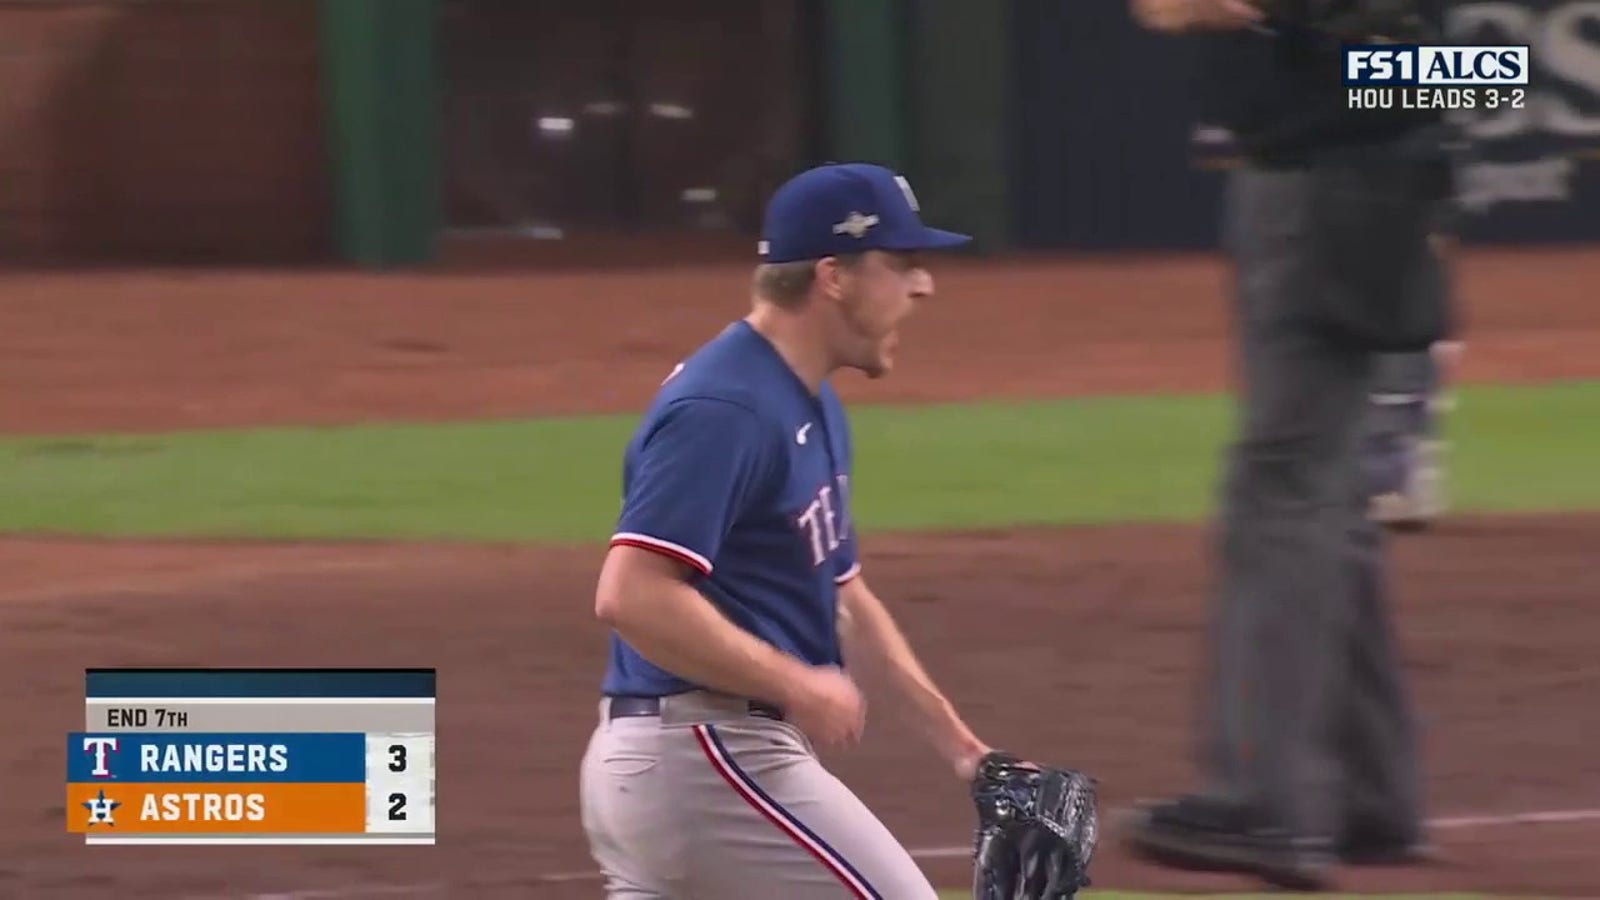 Josh Sborz gets Rangers out of seventh inning after Astros' Michael Brantley grounds out into a double play